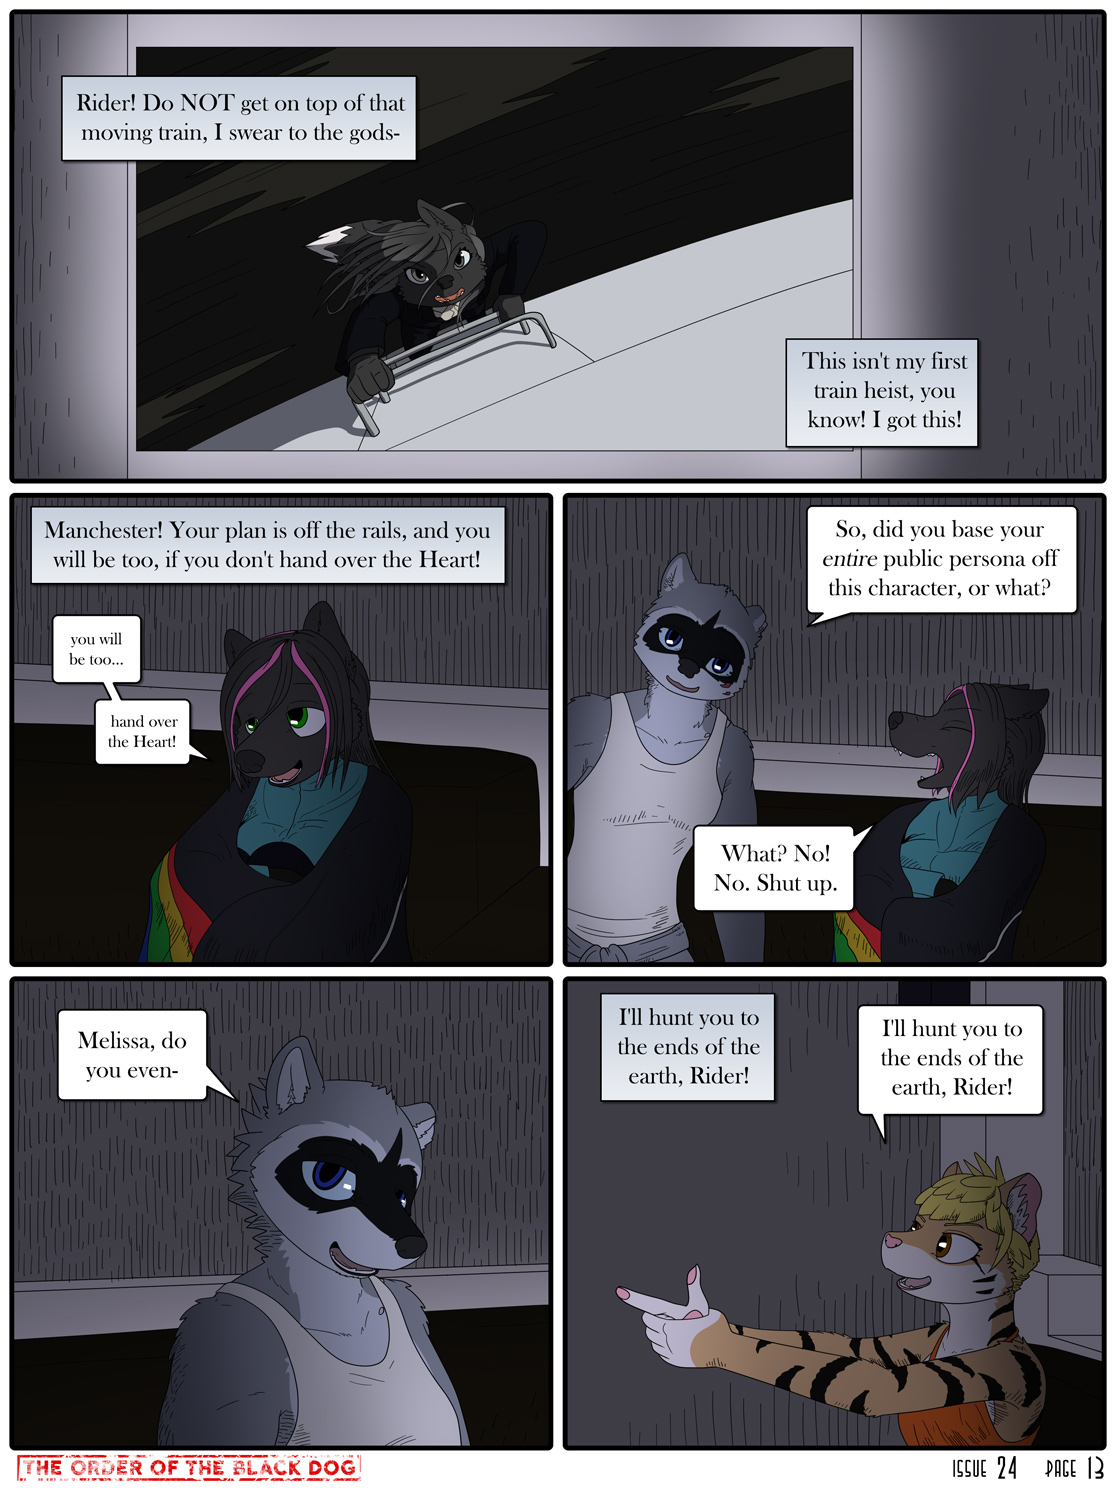 Issue 24, Page 13